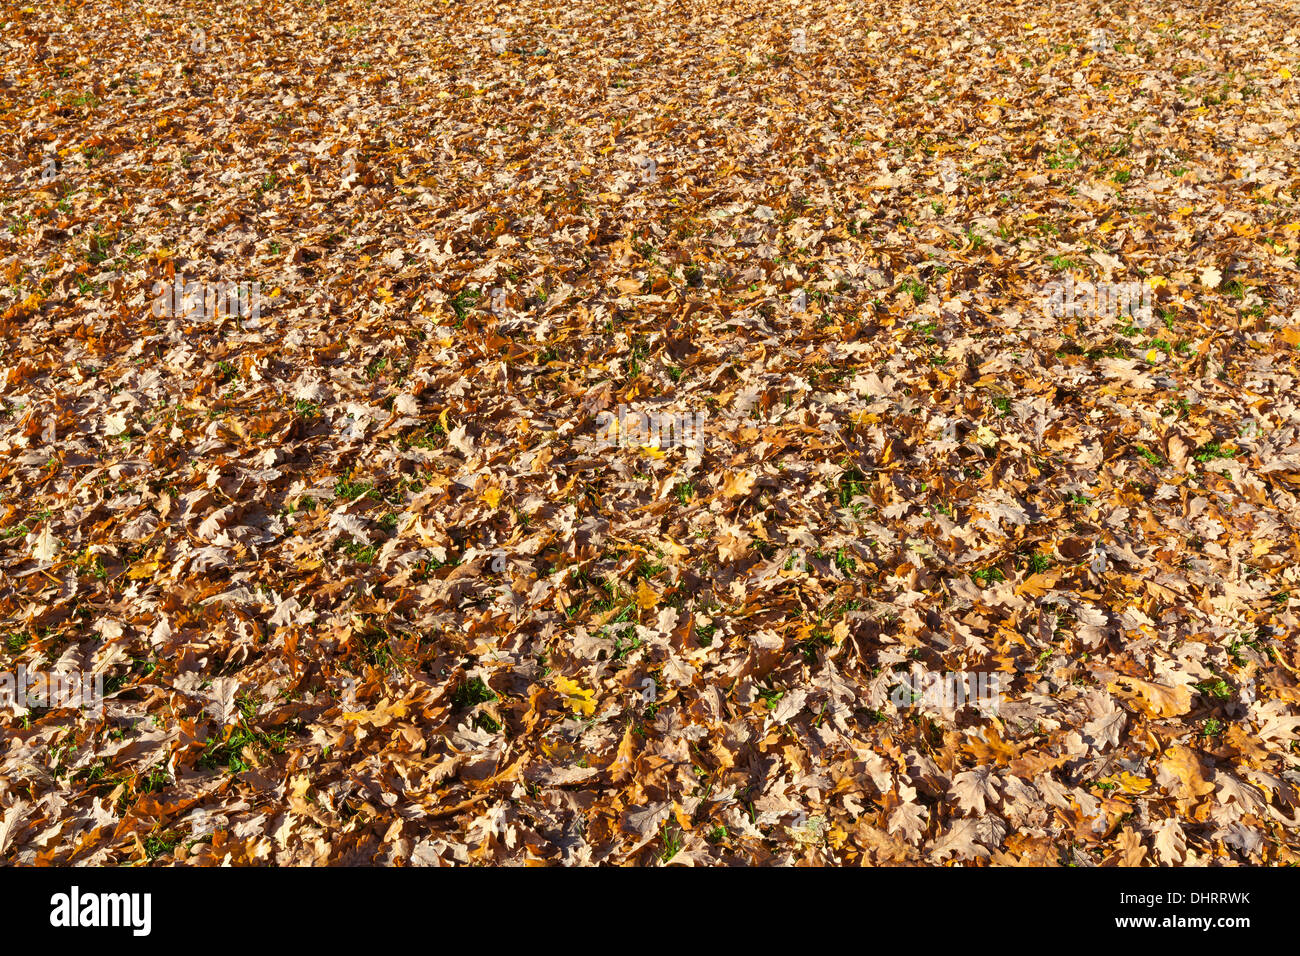 Autumn leaves on grass lawn Stock Photo